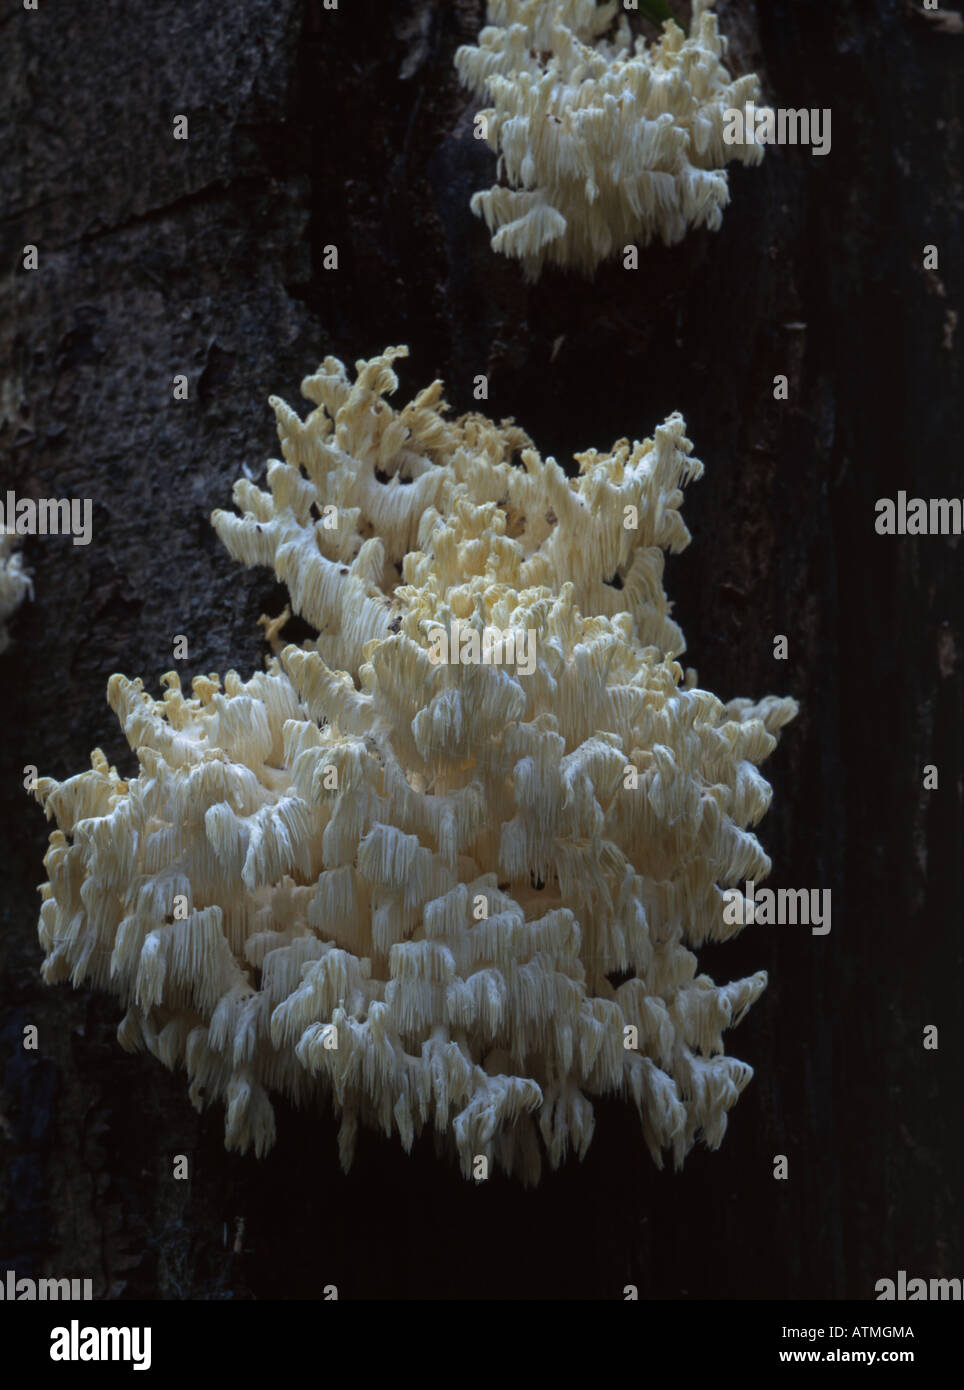 Coral Tooth Hericium coralloides. Attached to decaying Beech trunk Ebernoe Forest England Stock Photo